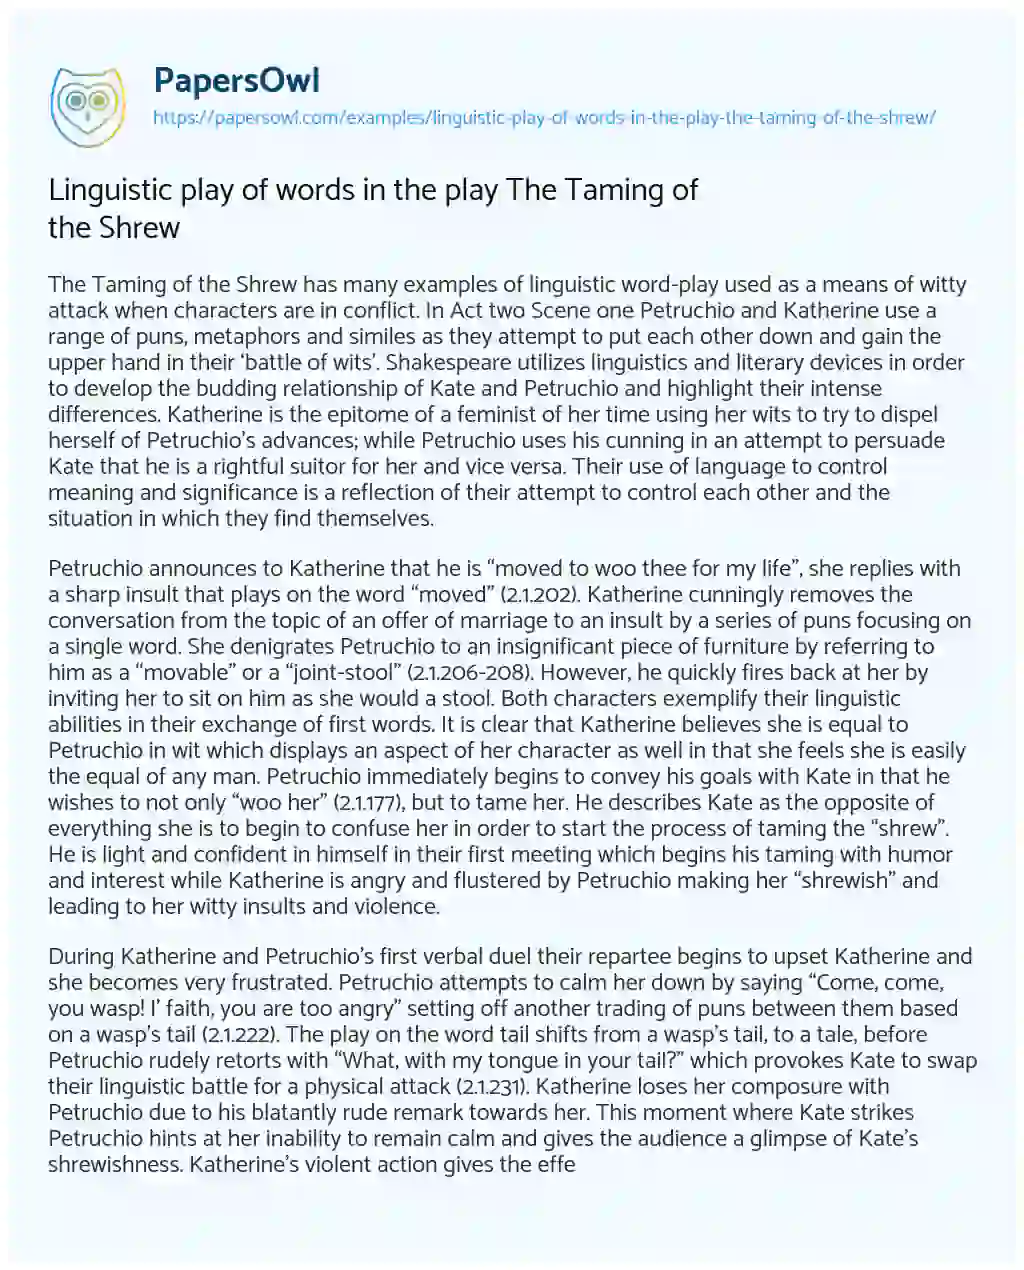 Essay on Linguistic Play of Words in the Play the Taming of the Shrew